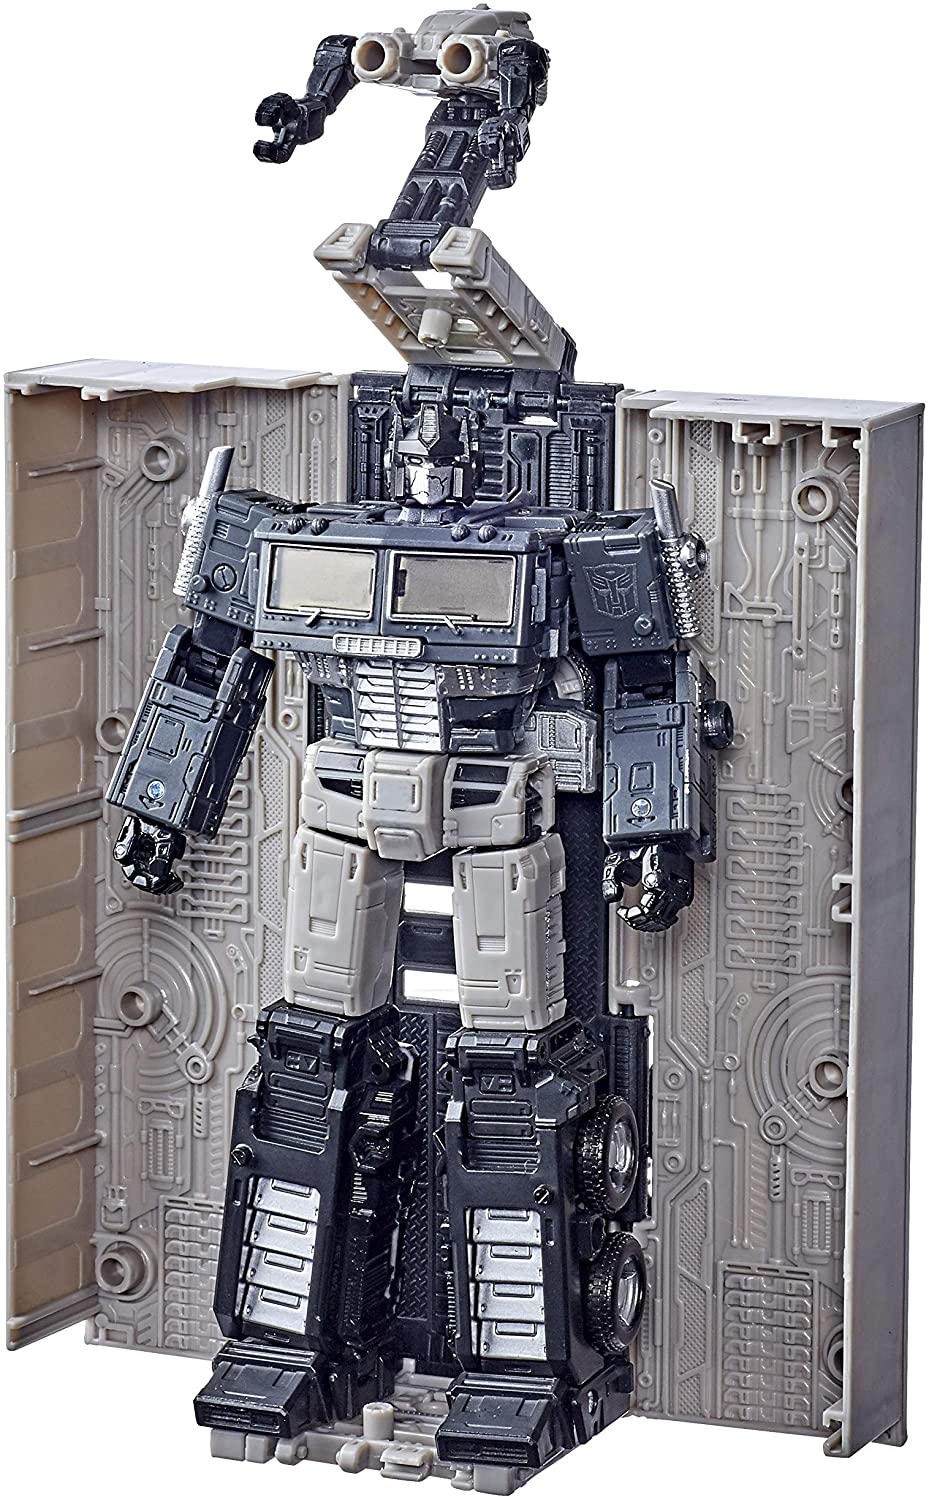 Transformers Earthrise War For Cybertron 8 Inch Action Figure Leader Class - Alternate Universe Optimus Prime Exclusive